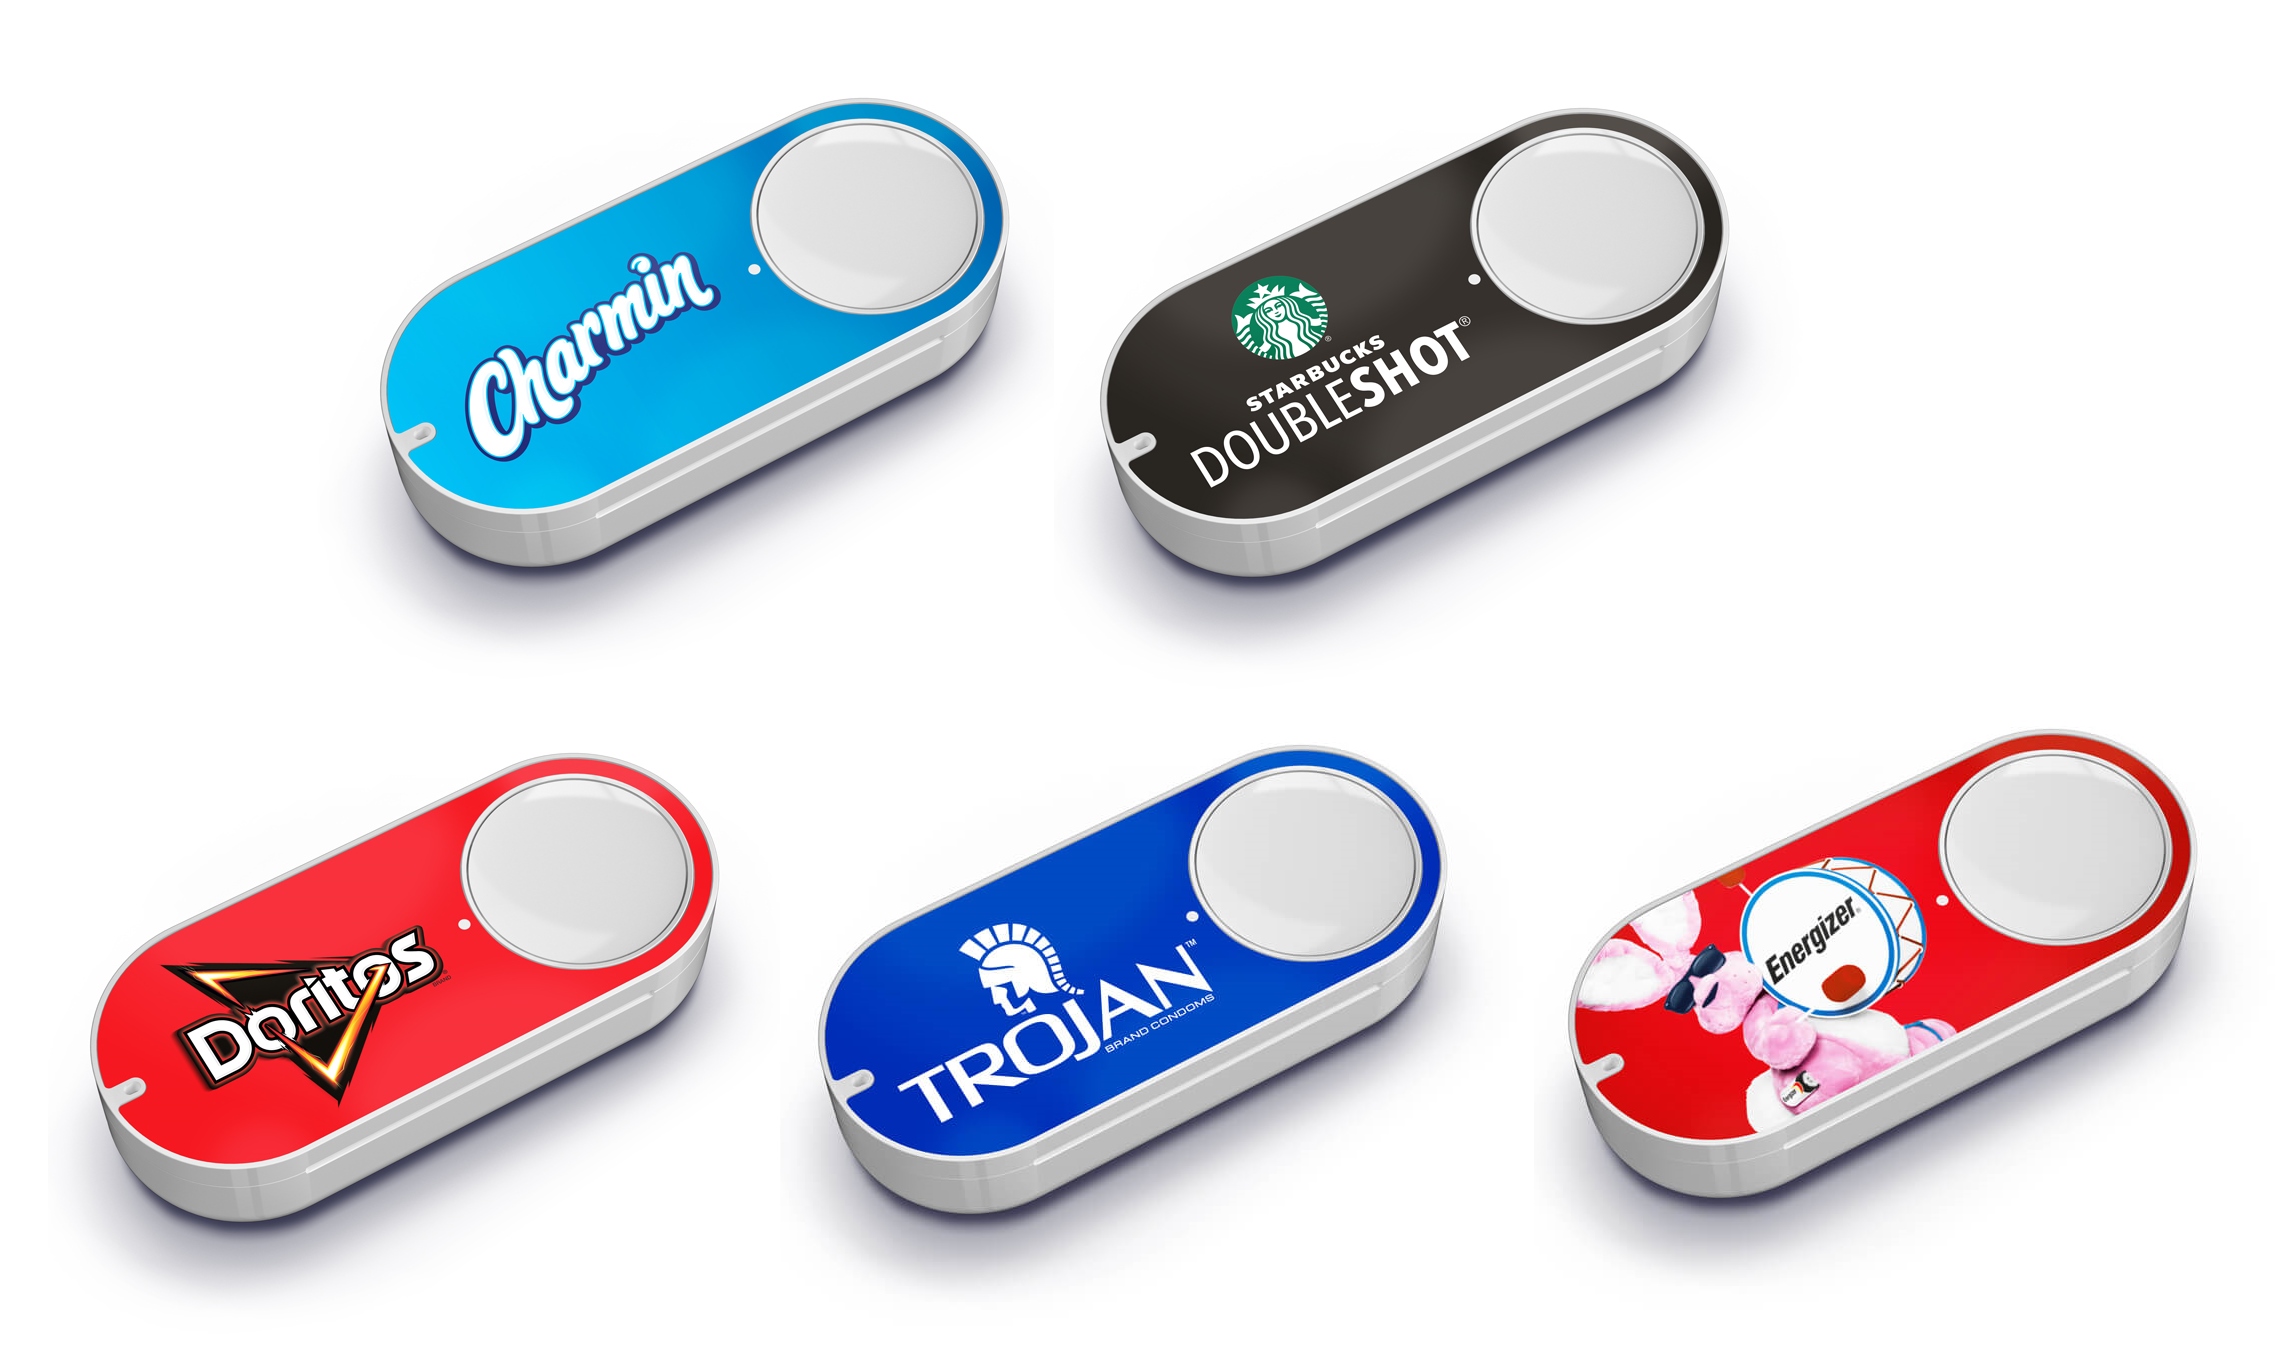 Amazon Triples Dash Button Line with Over 100 Products